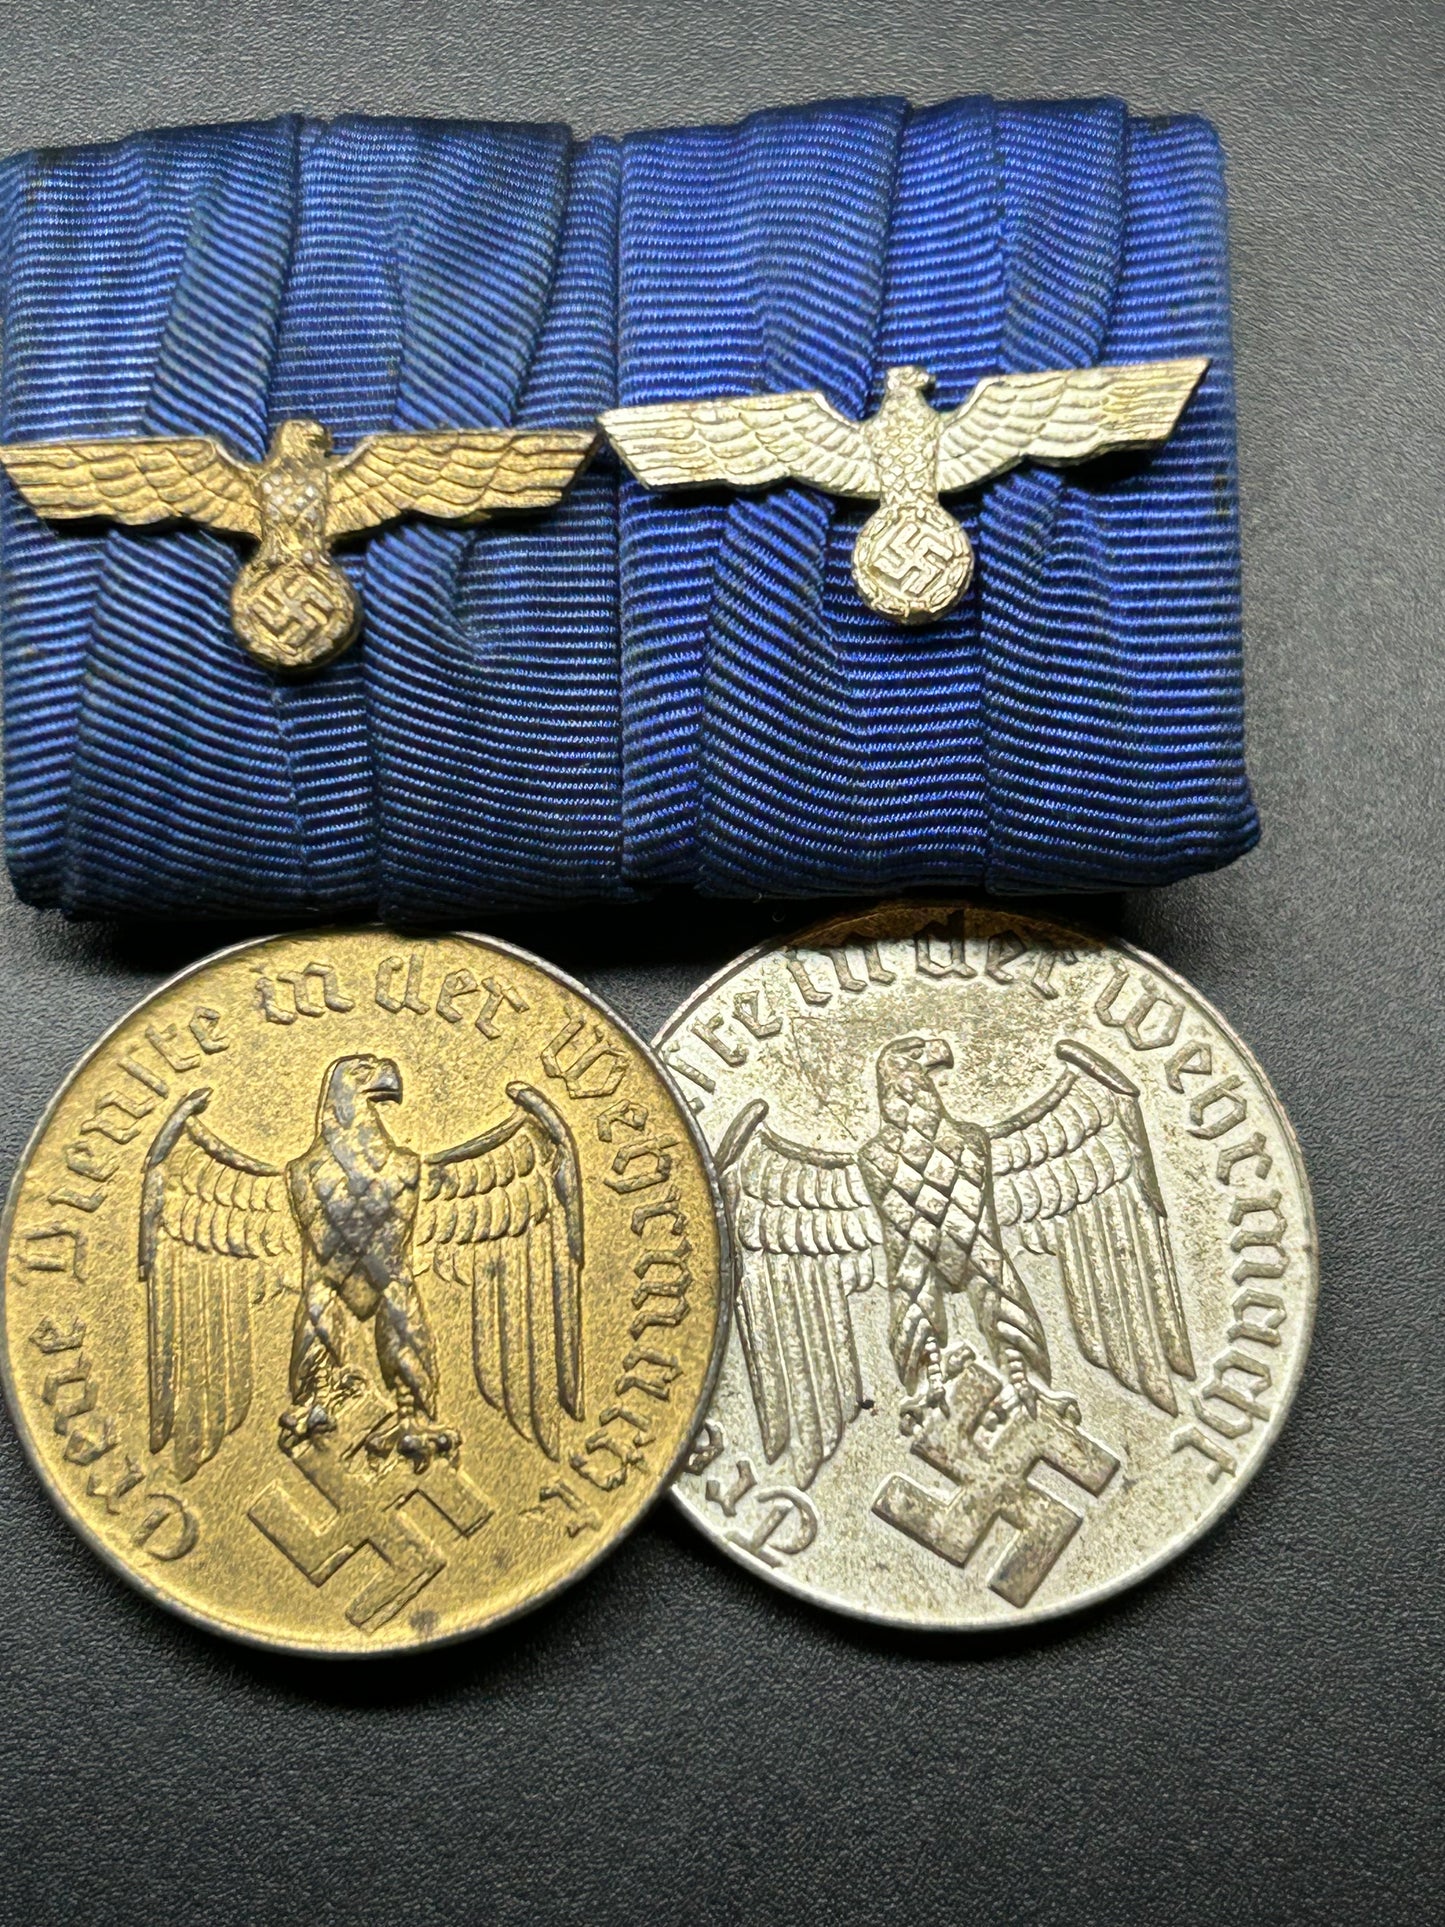 Heer 4 and 12 year faithful service parade mount medals